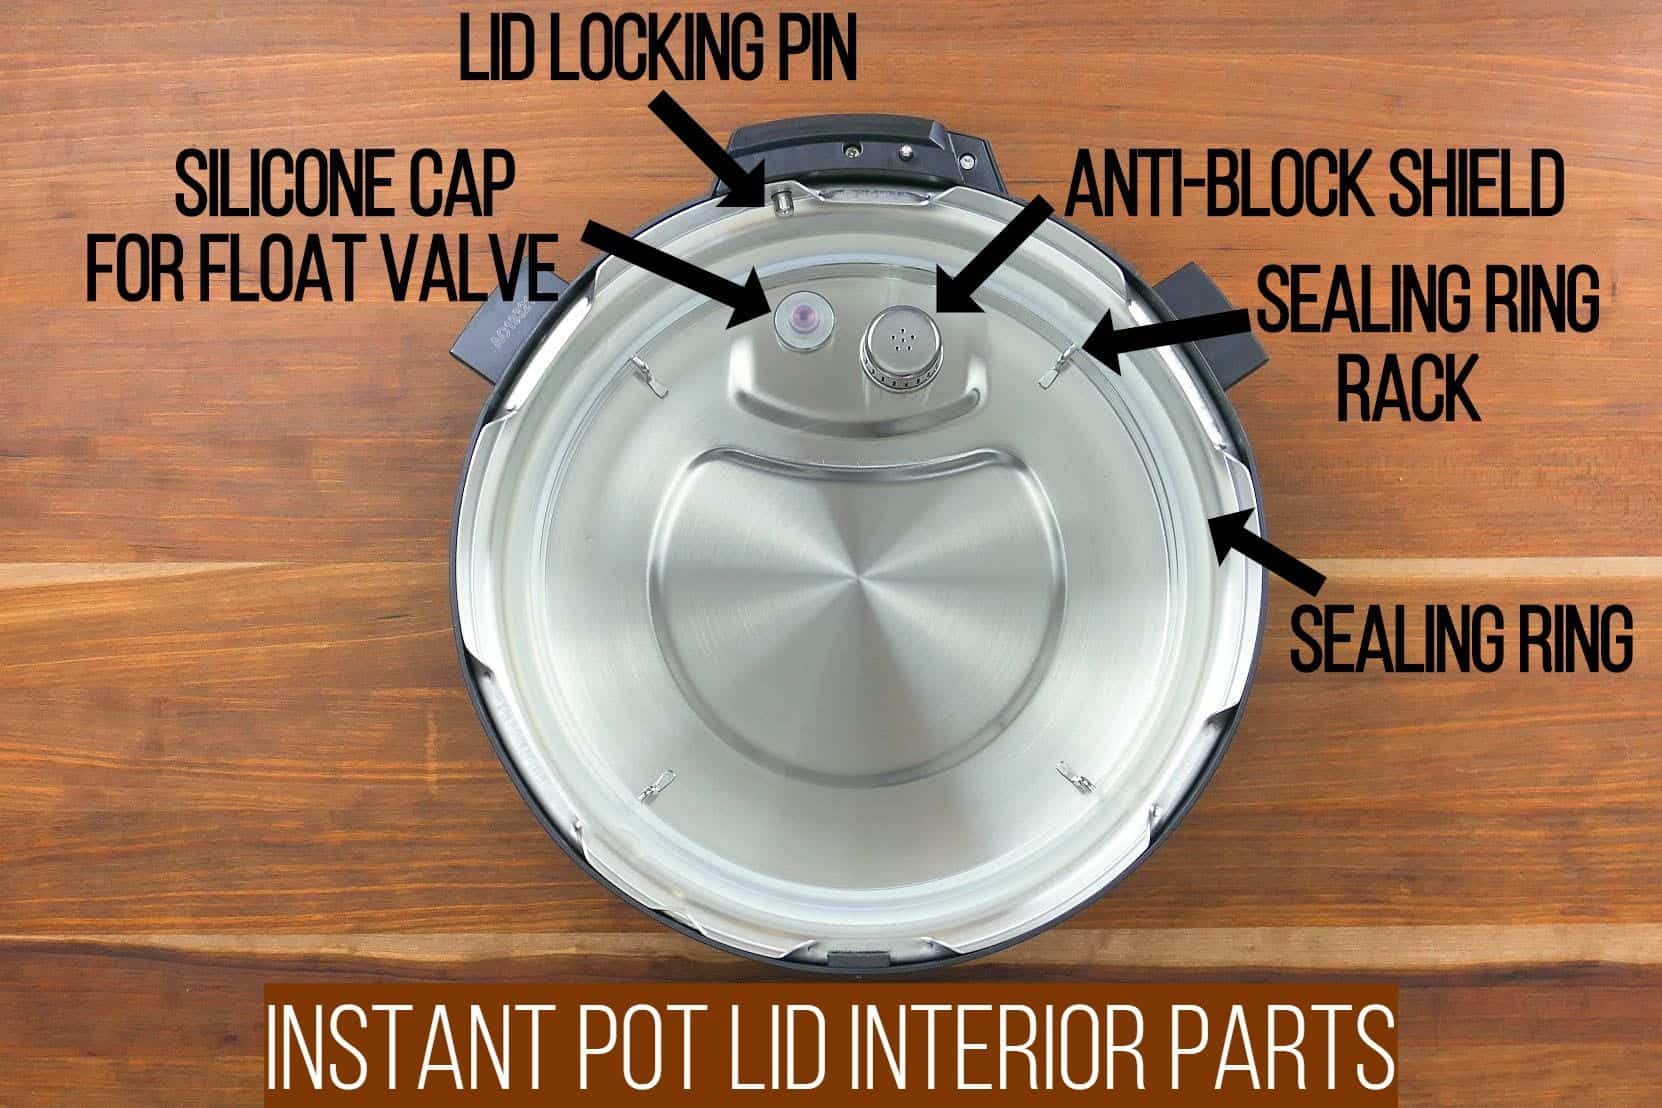 Instant Pot Pro lid interior parts - silicone cap for float valve, lid locking pin, anti block shield, sealing ring rack, sealing ring - Paint the Kitchen Red